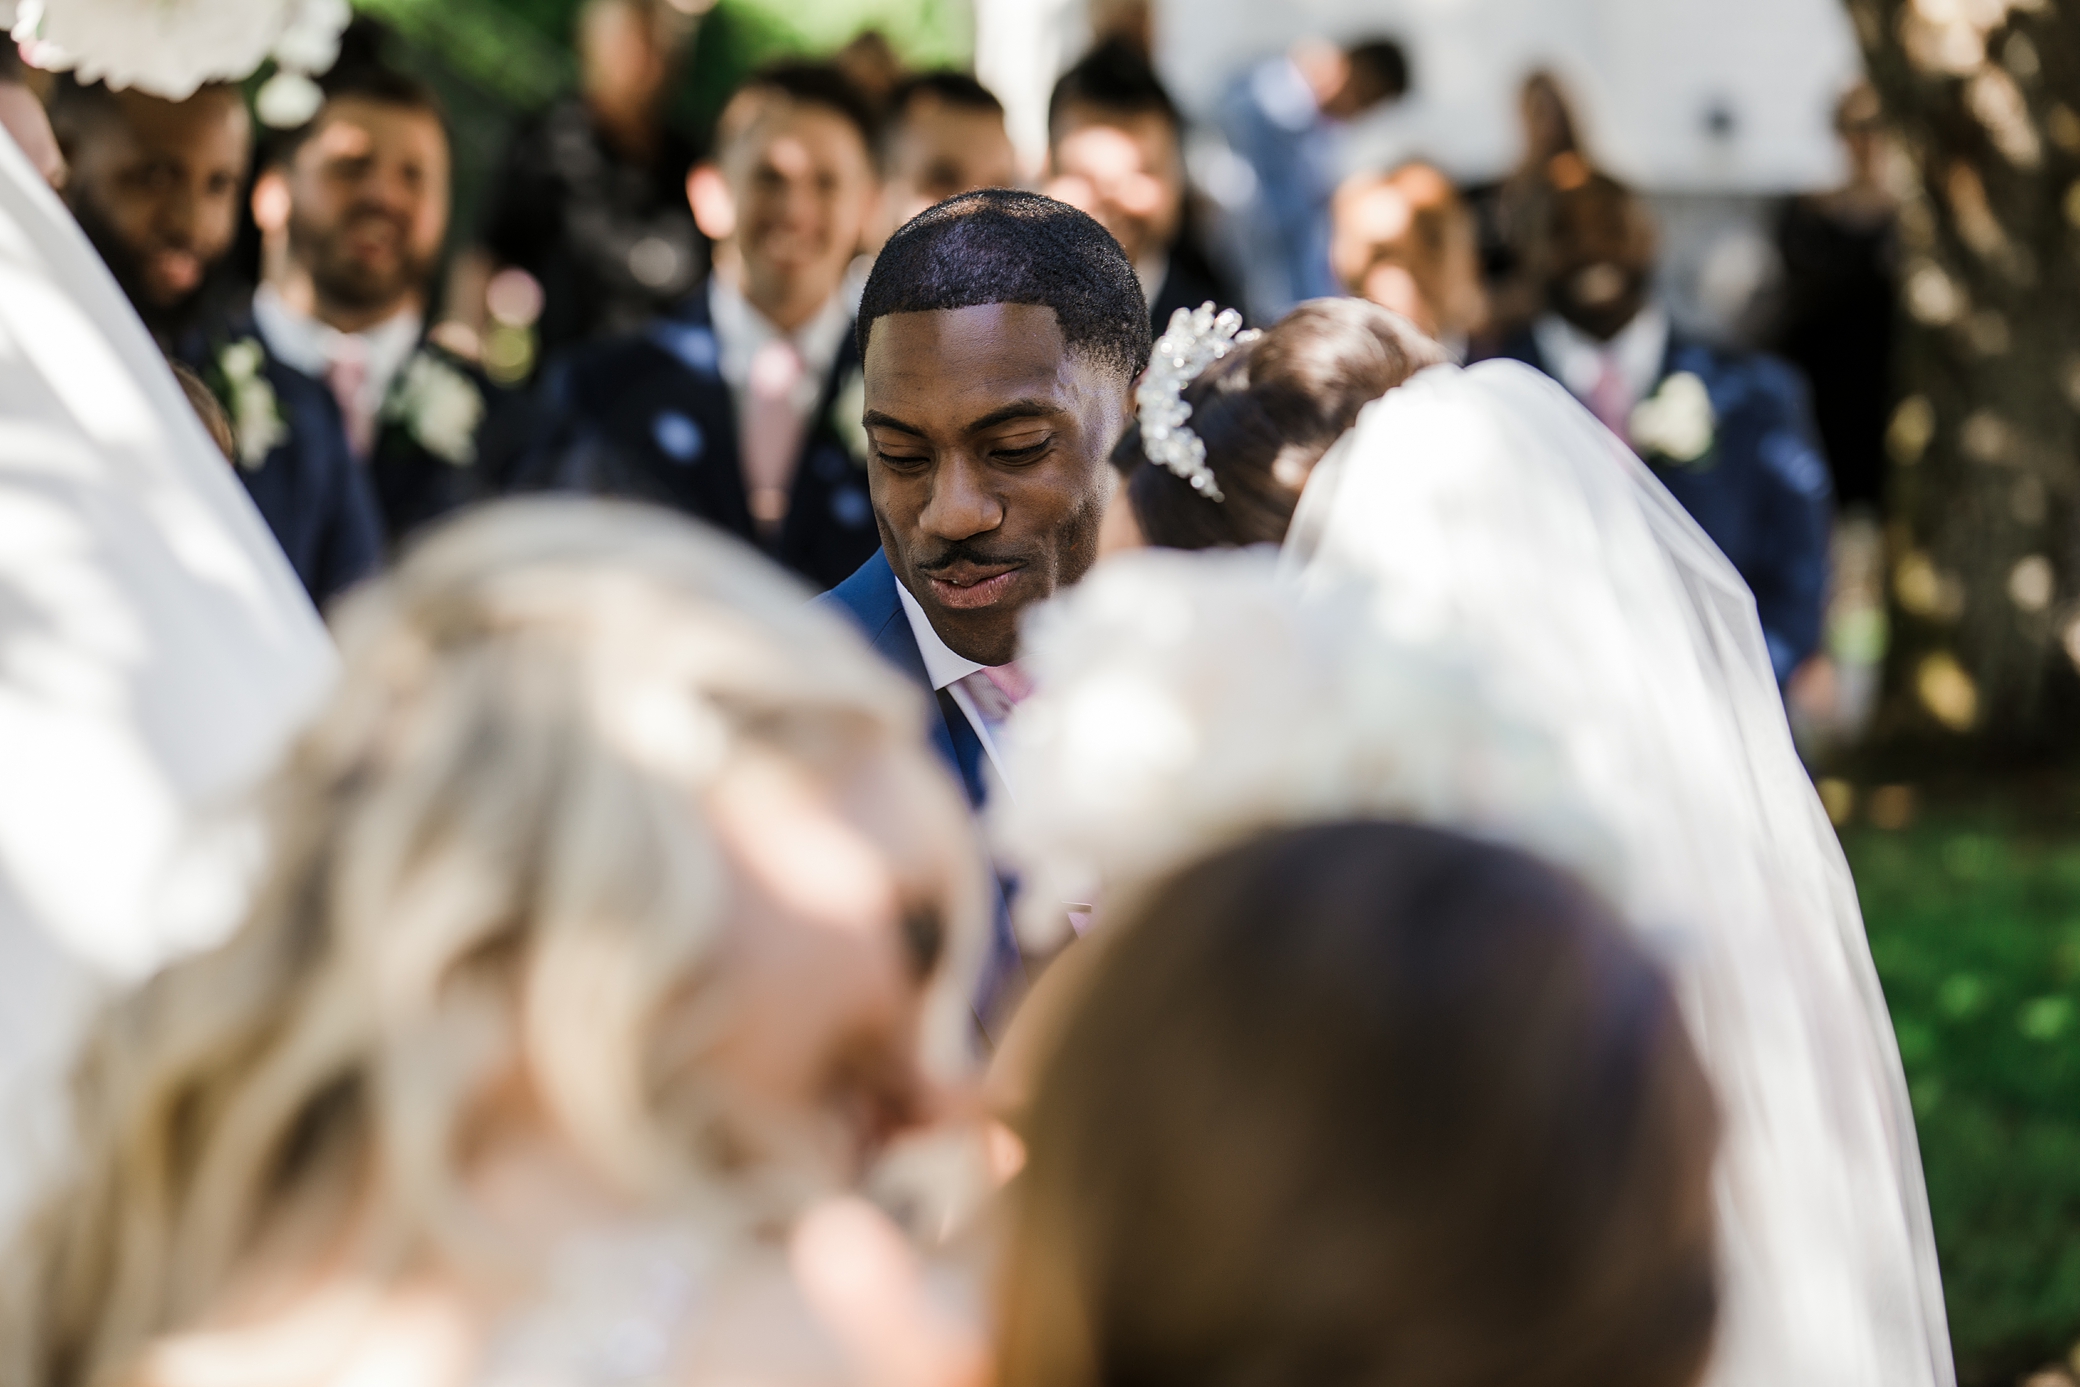 Wedding vows during outdoor wedding ceremony in Olympia, WA | Megan Montalvo Photography